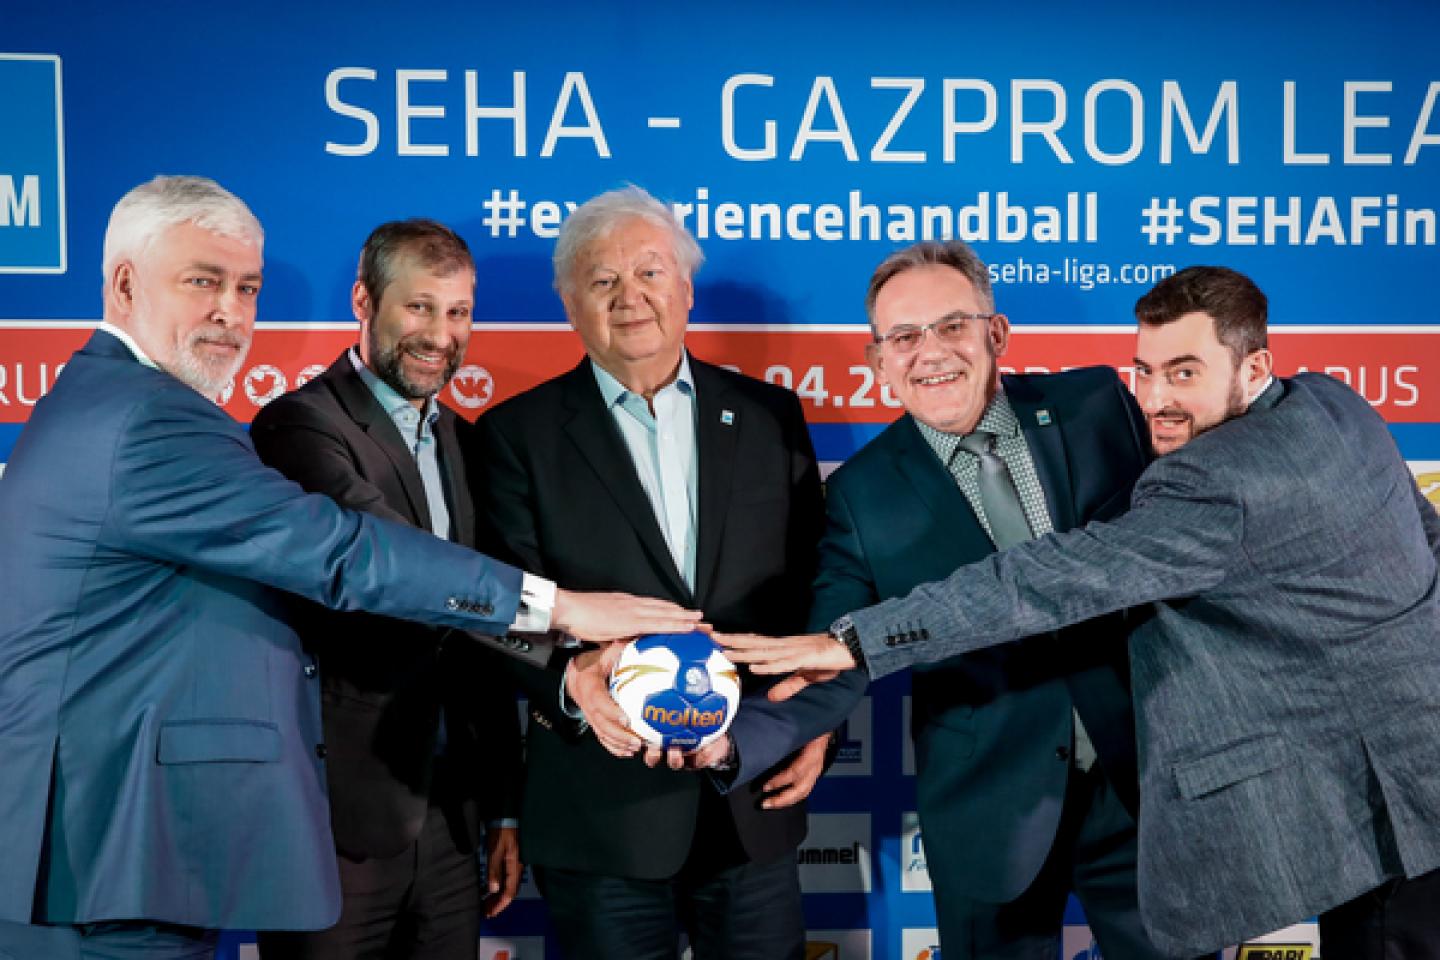 SEHA – Gazprom League announces addition of Chinese team